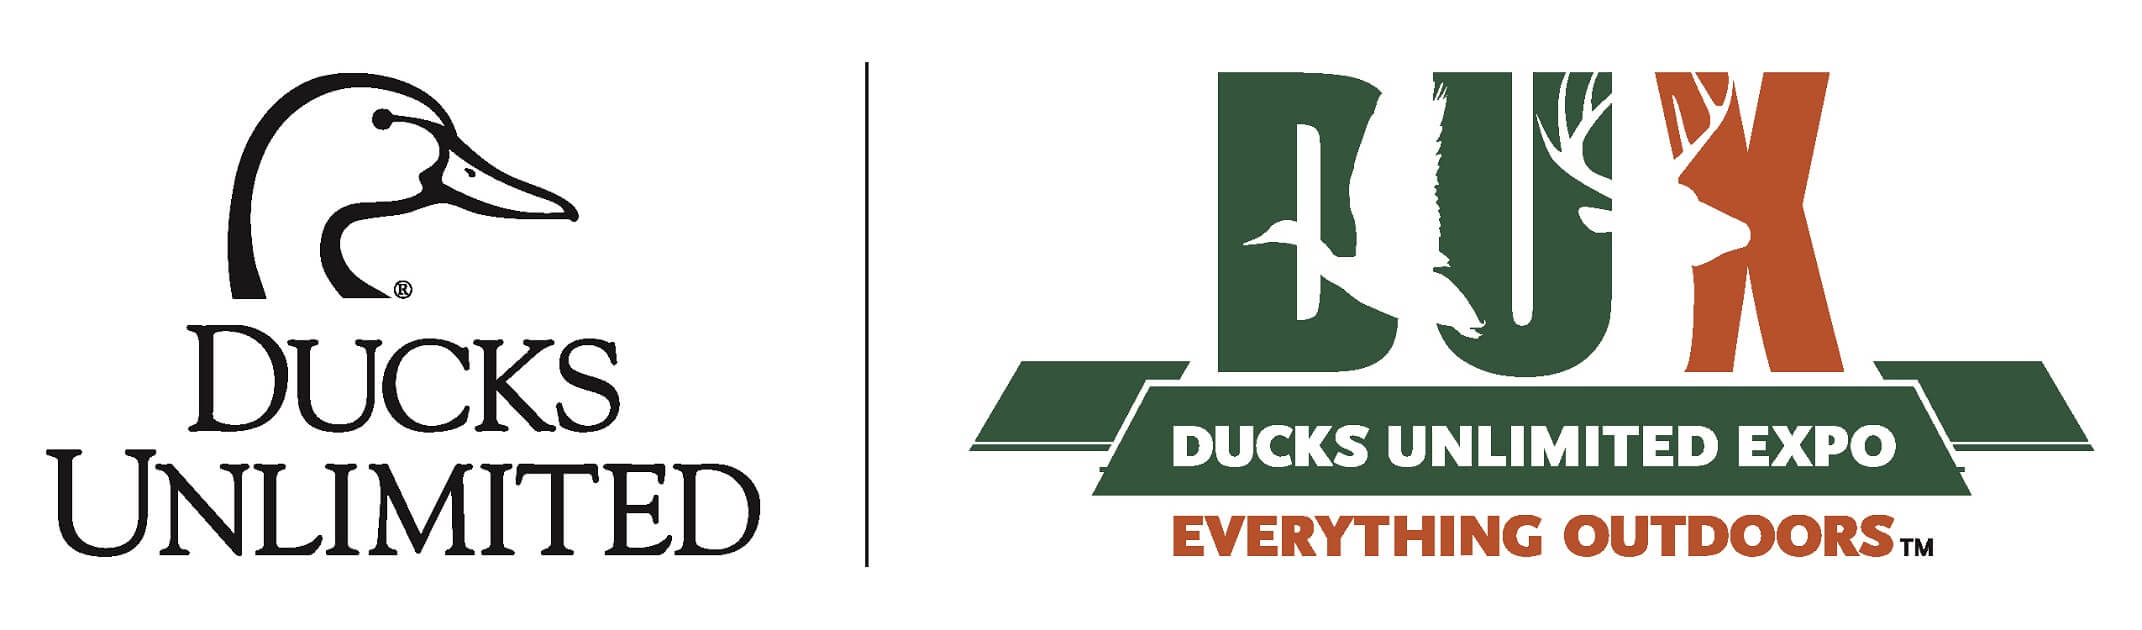 Ducks Unlimited Expo Coming to Memphis in 2025